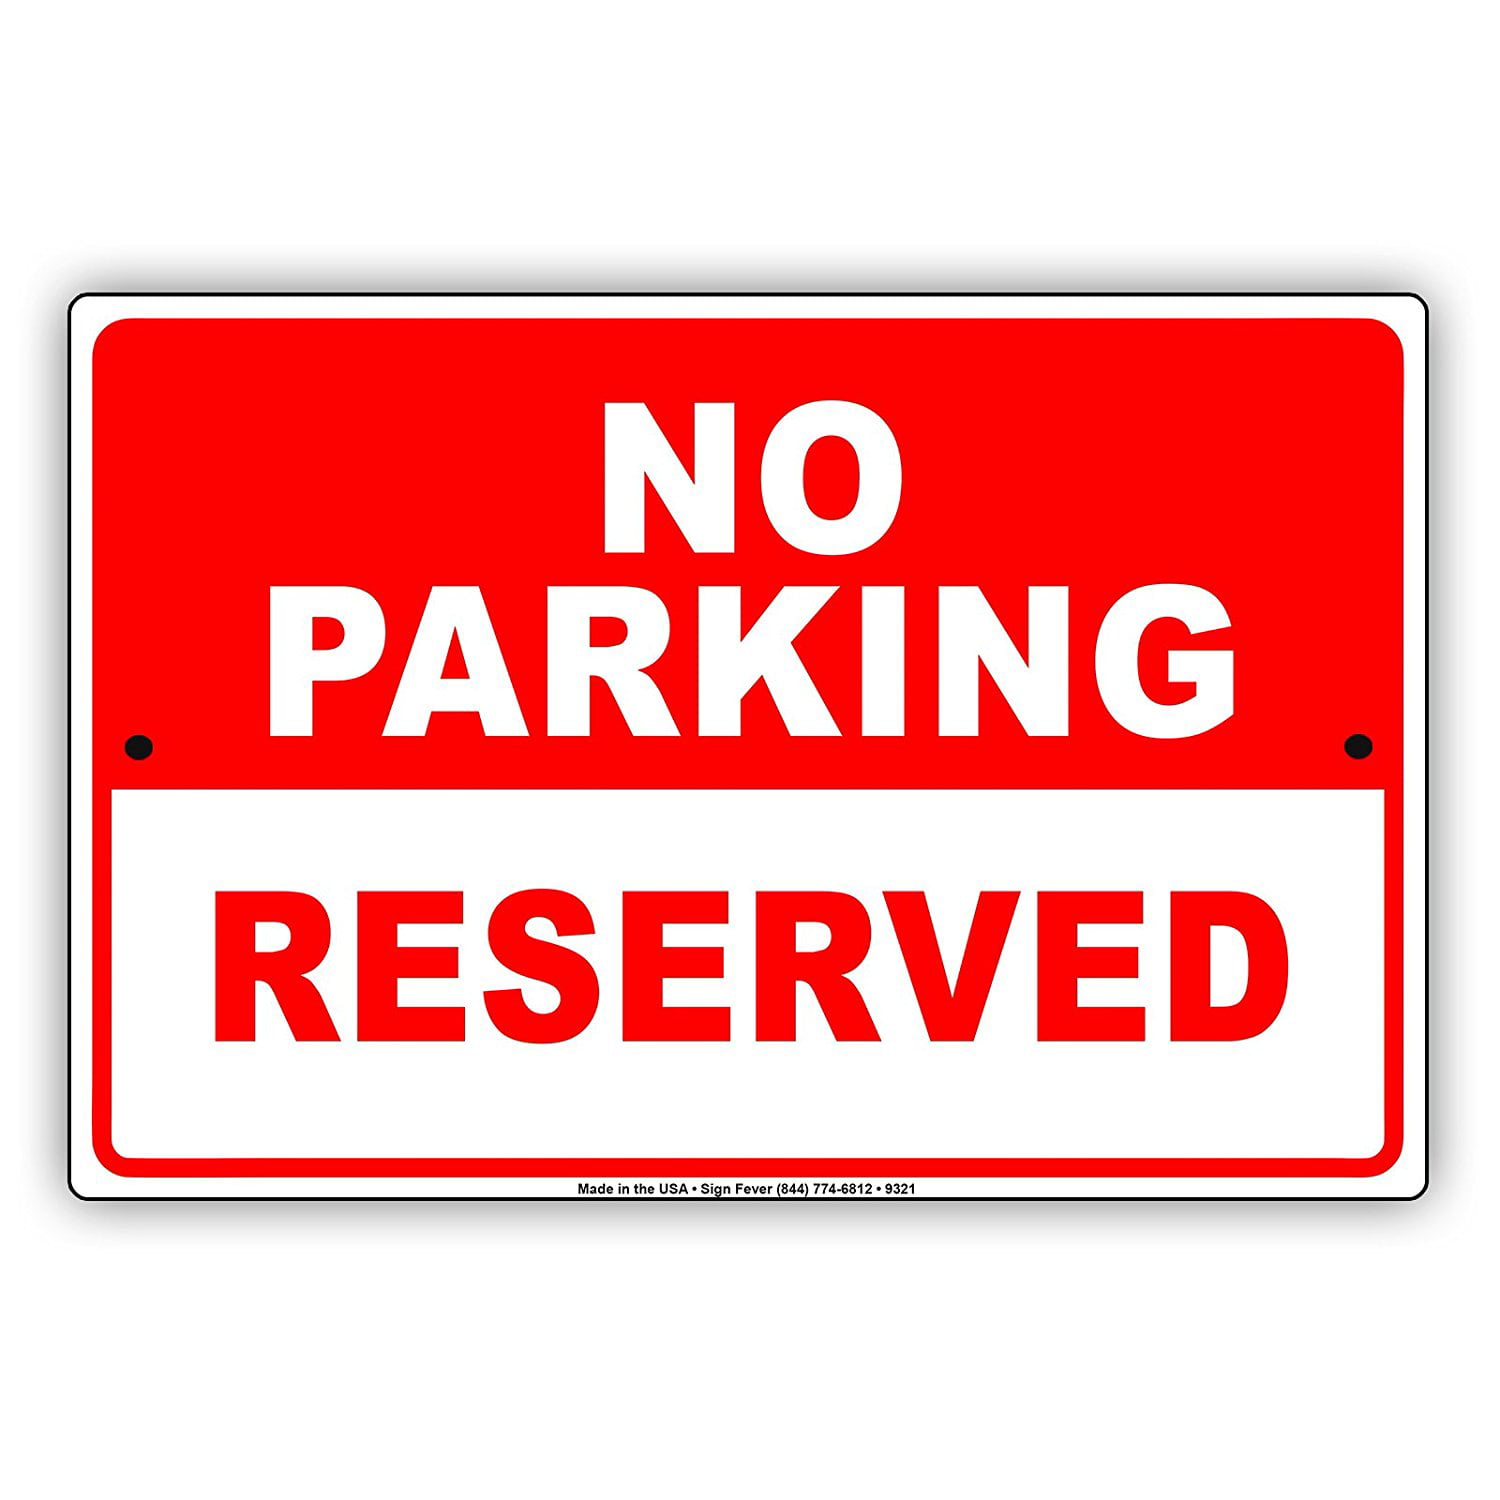 12 x 8 Rustproof Aluminum Metal Road Sign Street Warning Sign 2 pcs No Parking Signs Rustproof No Fading Garage in Constant Use” Sign “Keep Clear 